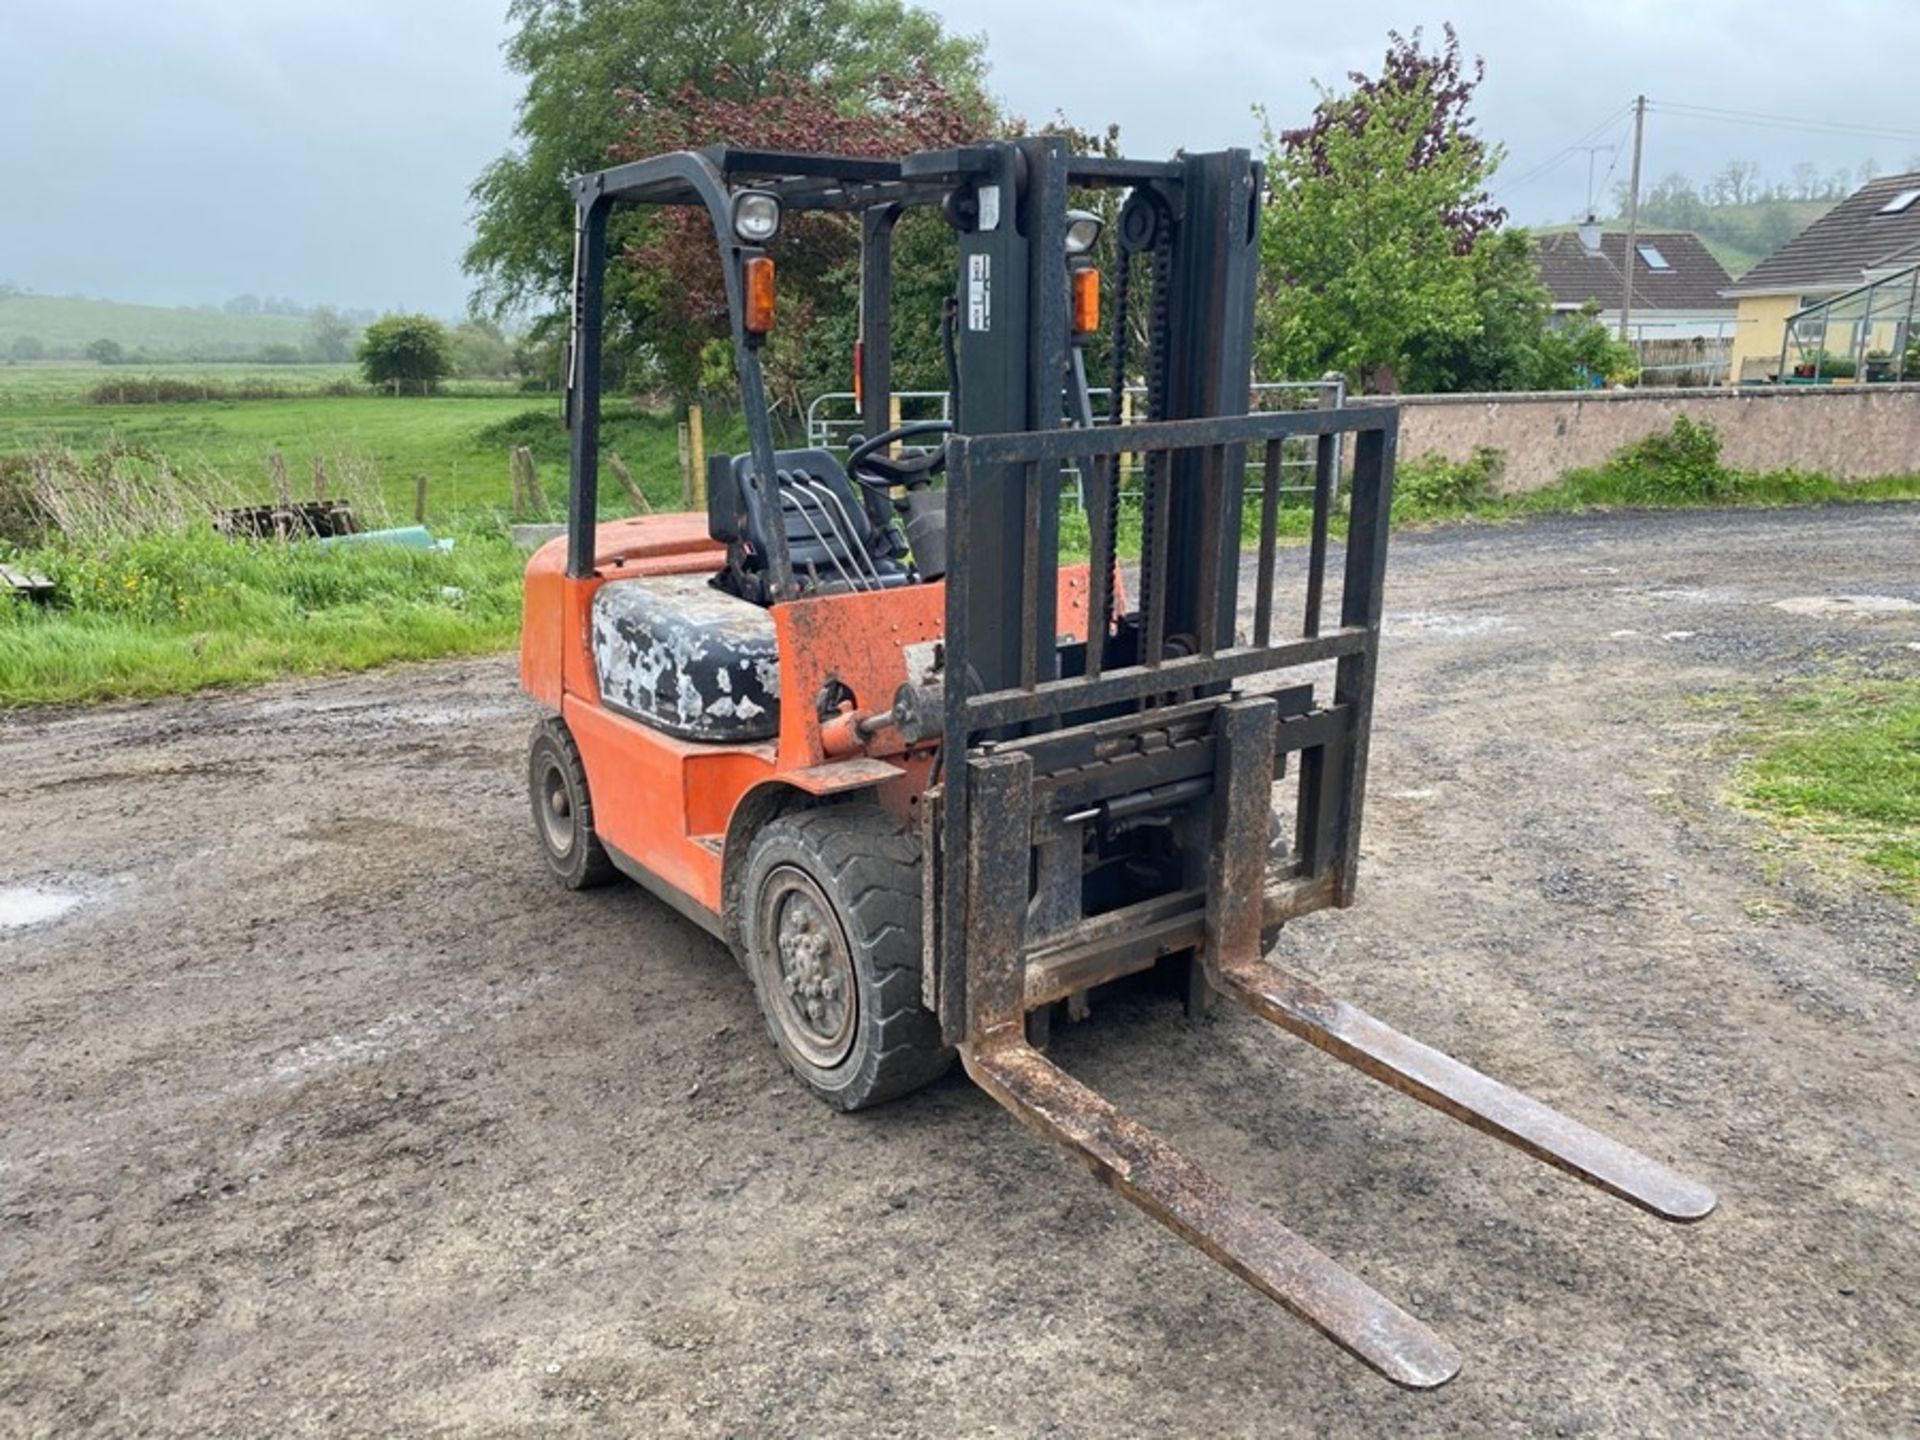 DALIAN 3TONNE FORKLIFT 904 HOURS C/W NEW SOLID BACK WHEELS (RUNNING WELL)